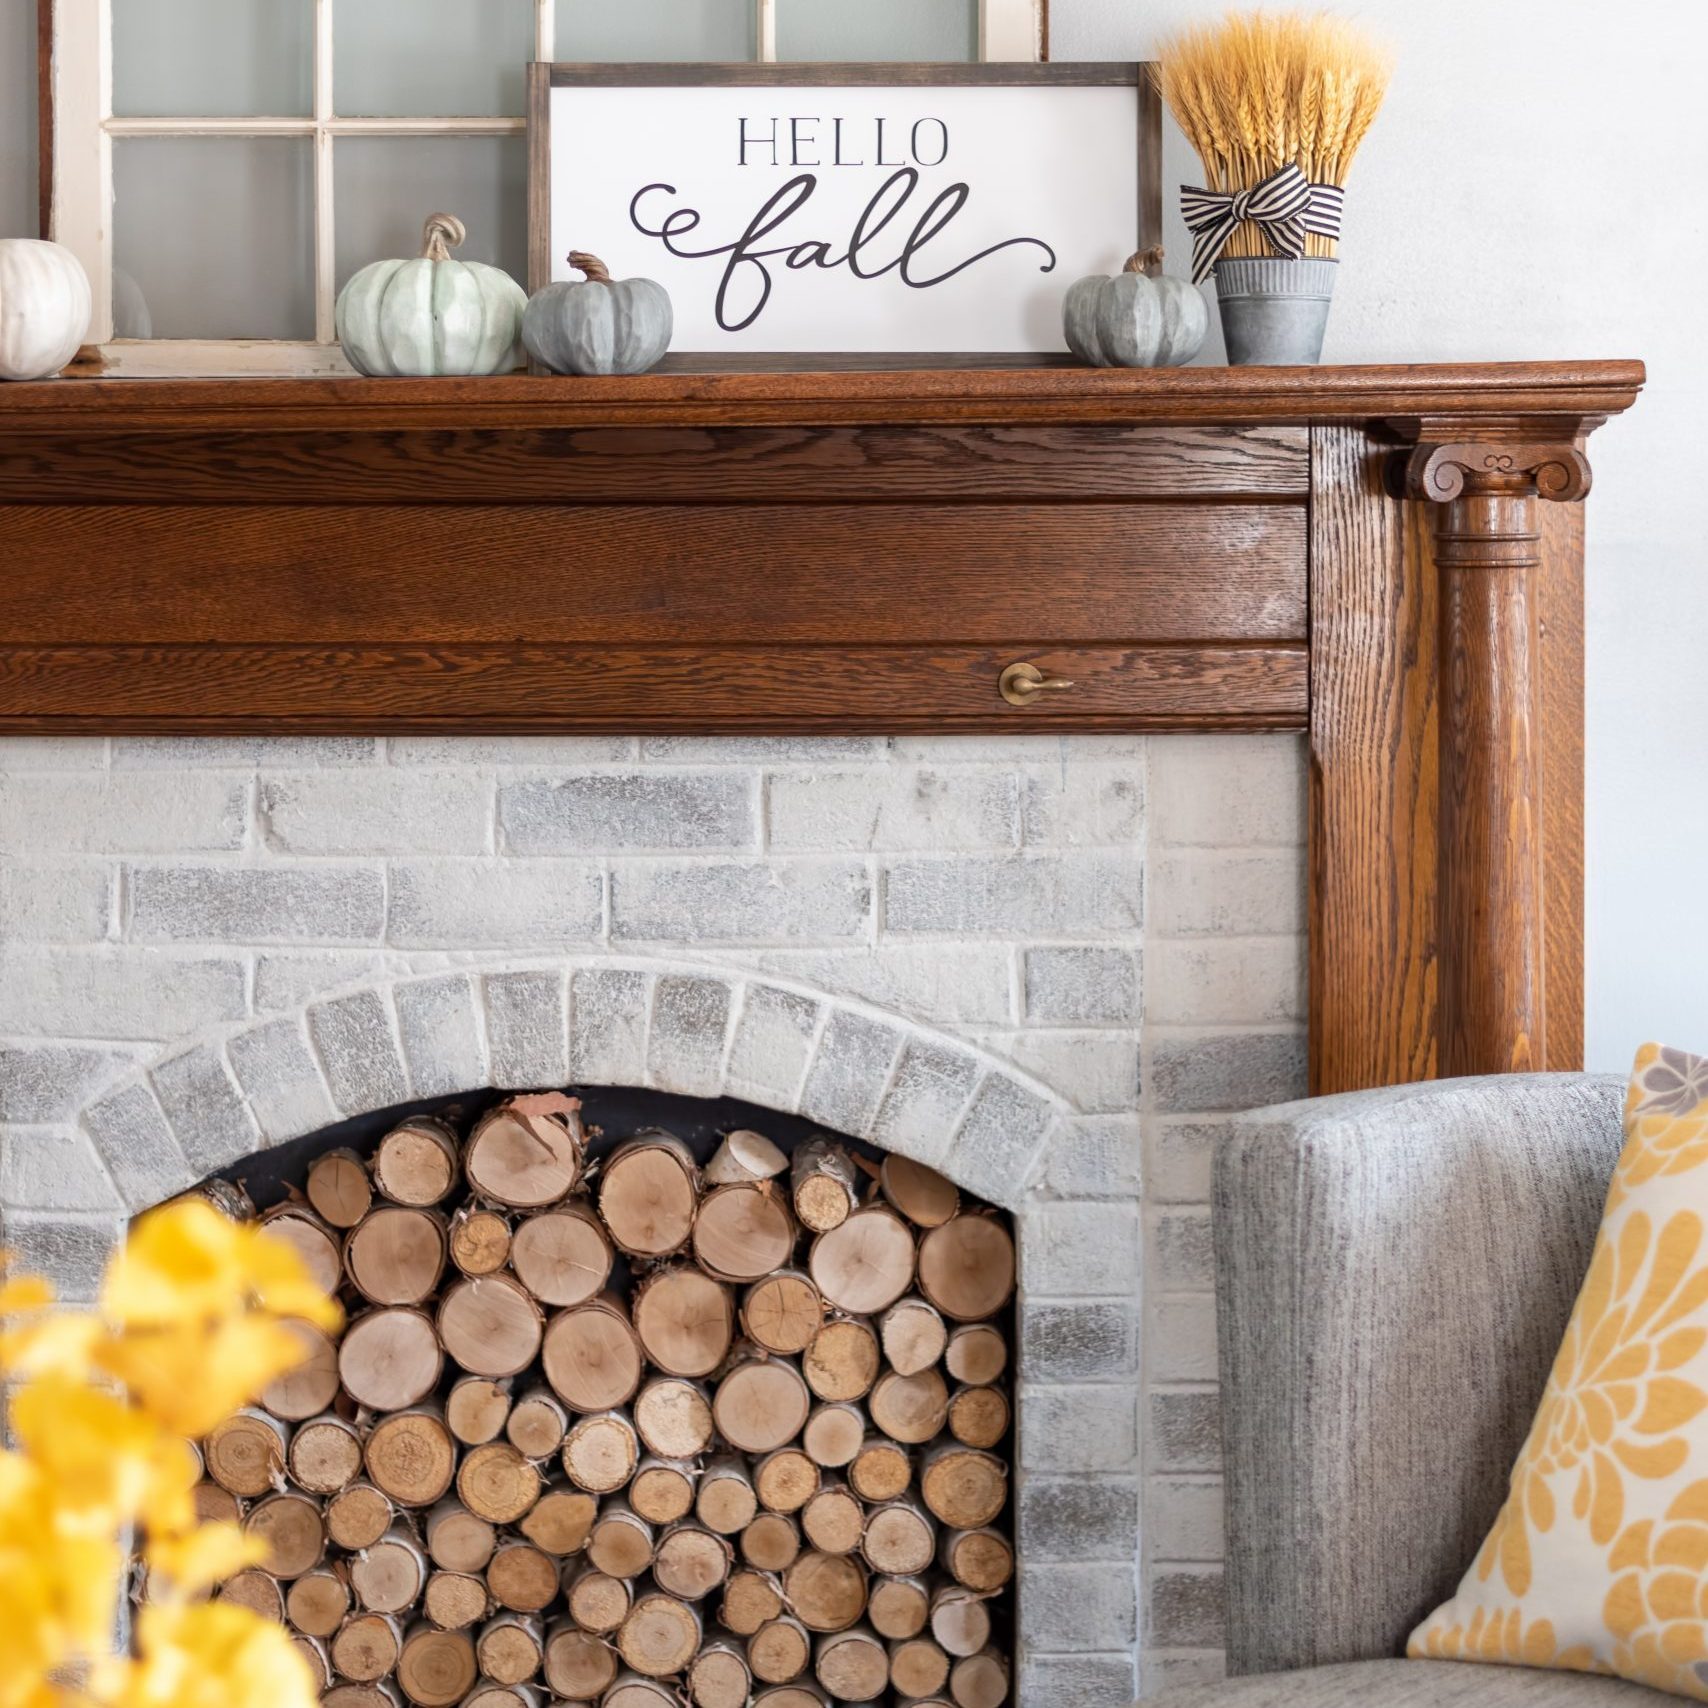 How to Stop Fireplace Drafts, How to Seal a Fireplace Opening